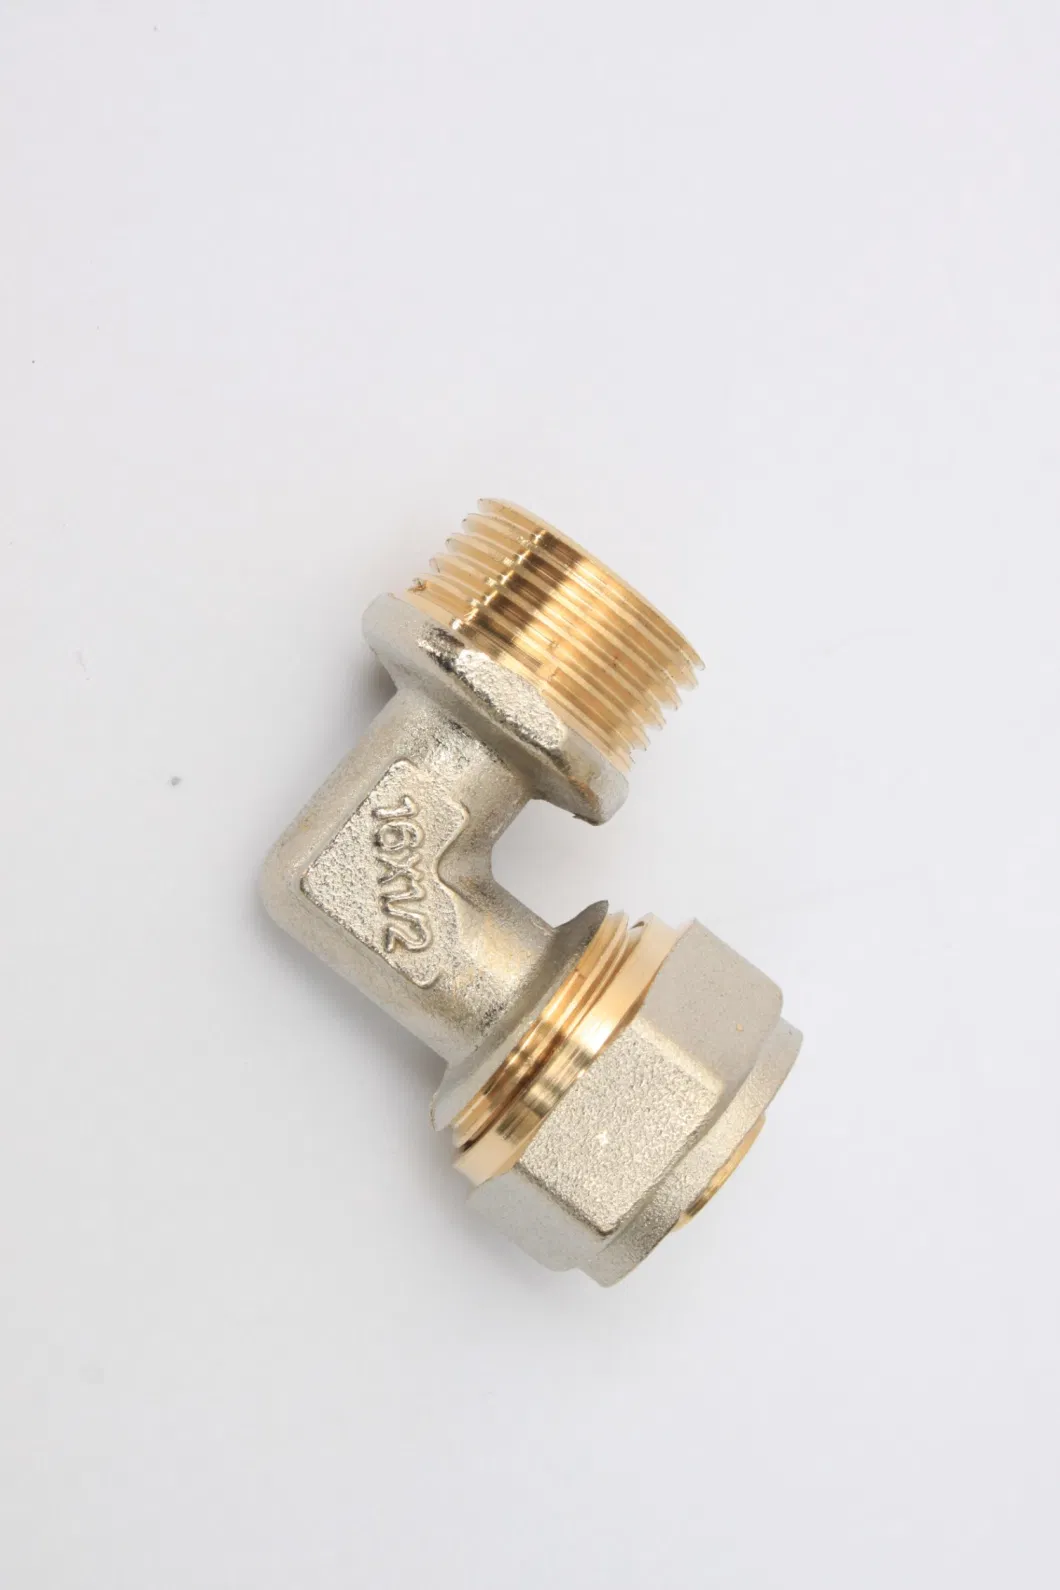 Fitting Pex Multilayer Plumbing Tube Fitting Brass Press Straight Fitting Female Coupling Pipe Connecting